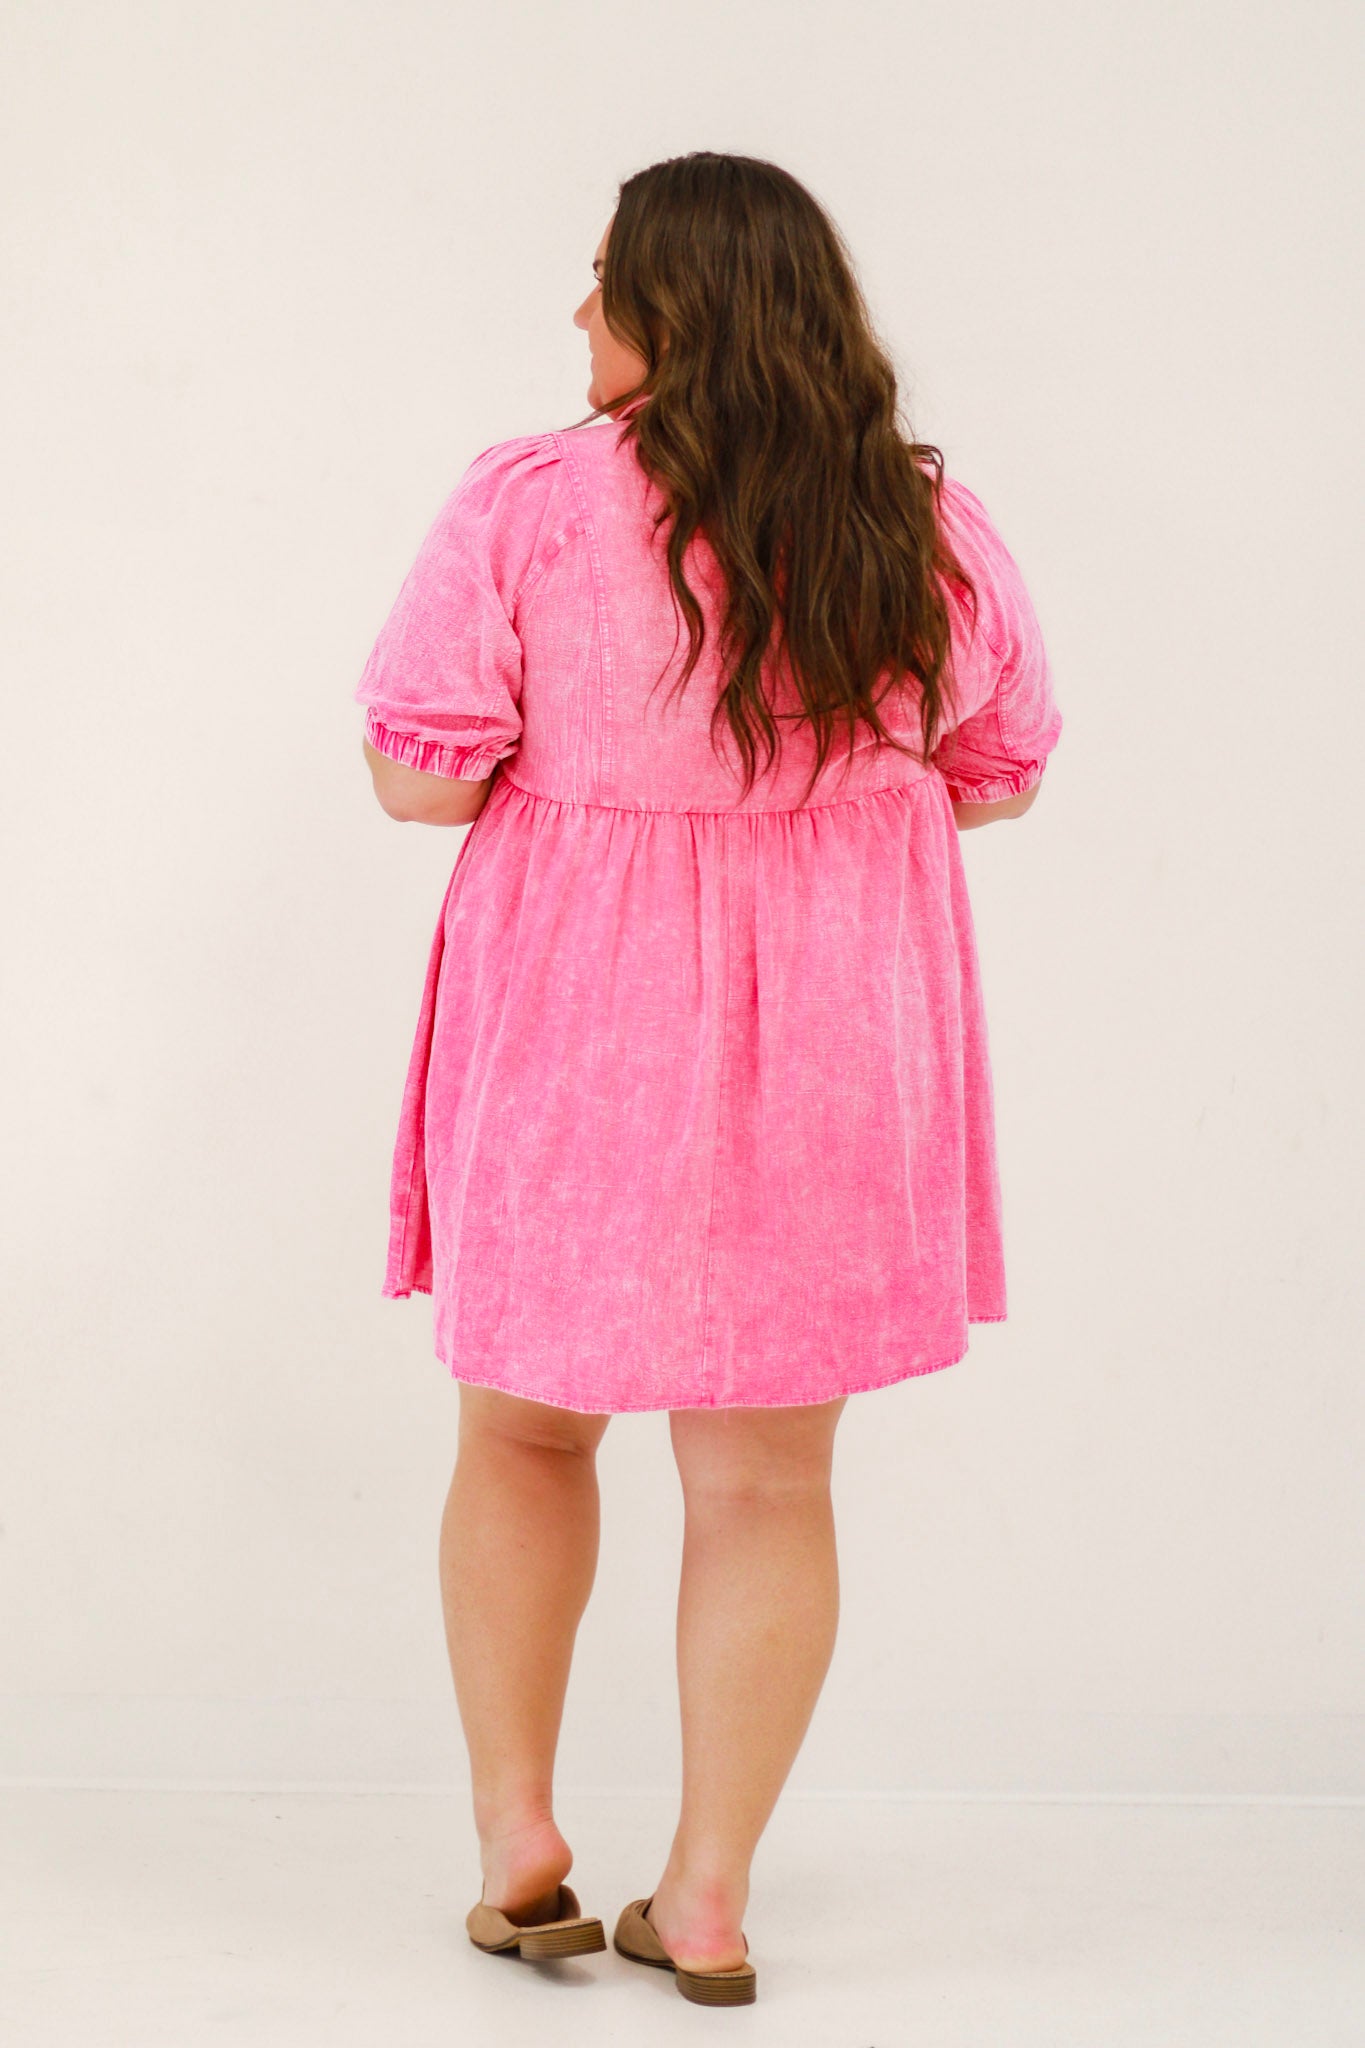 The Stunner Dress in Hot Pink